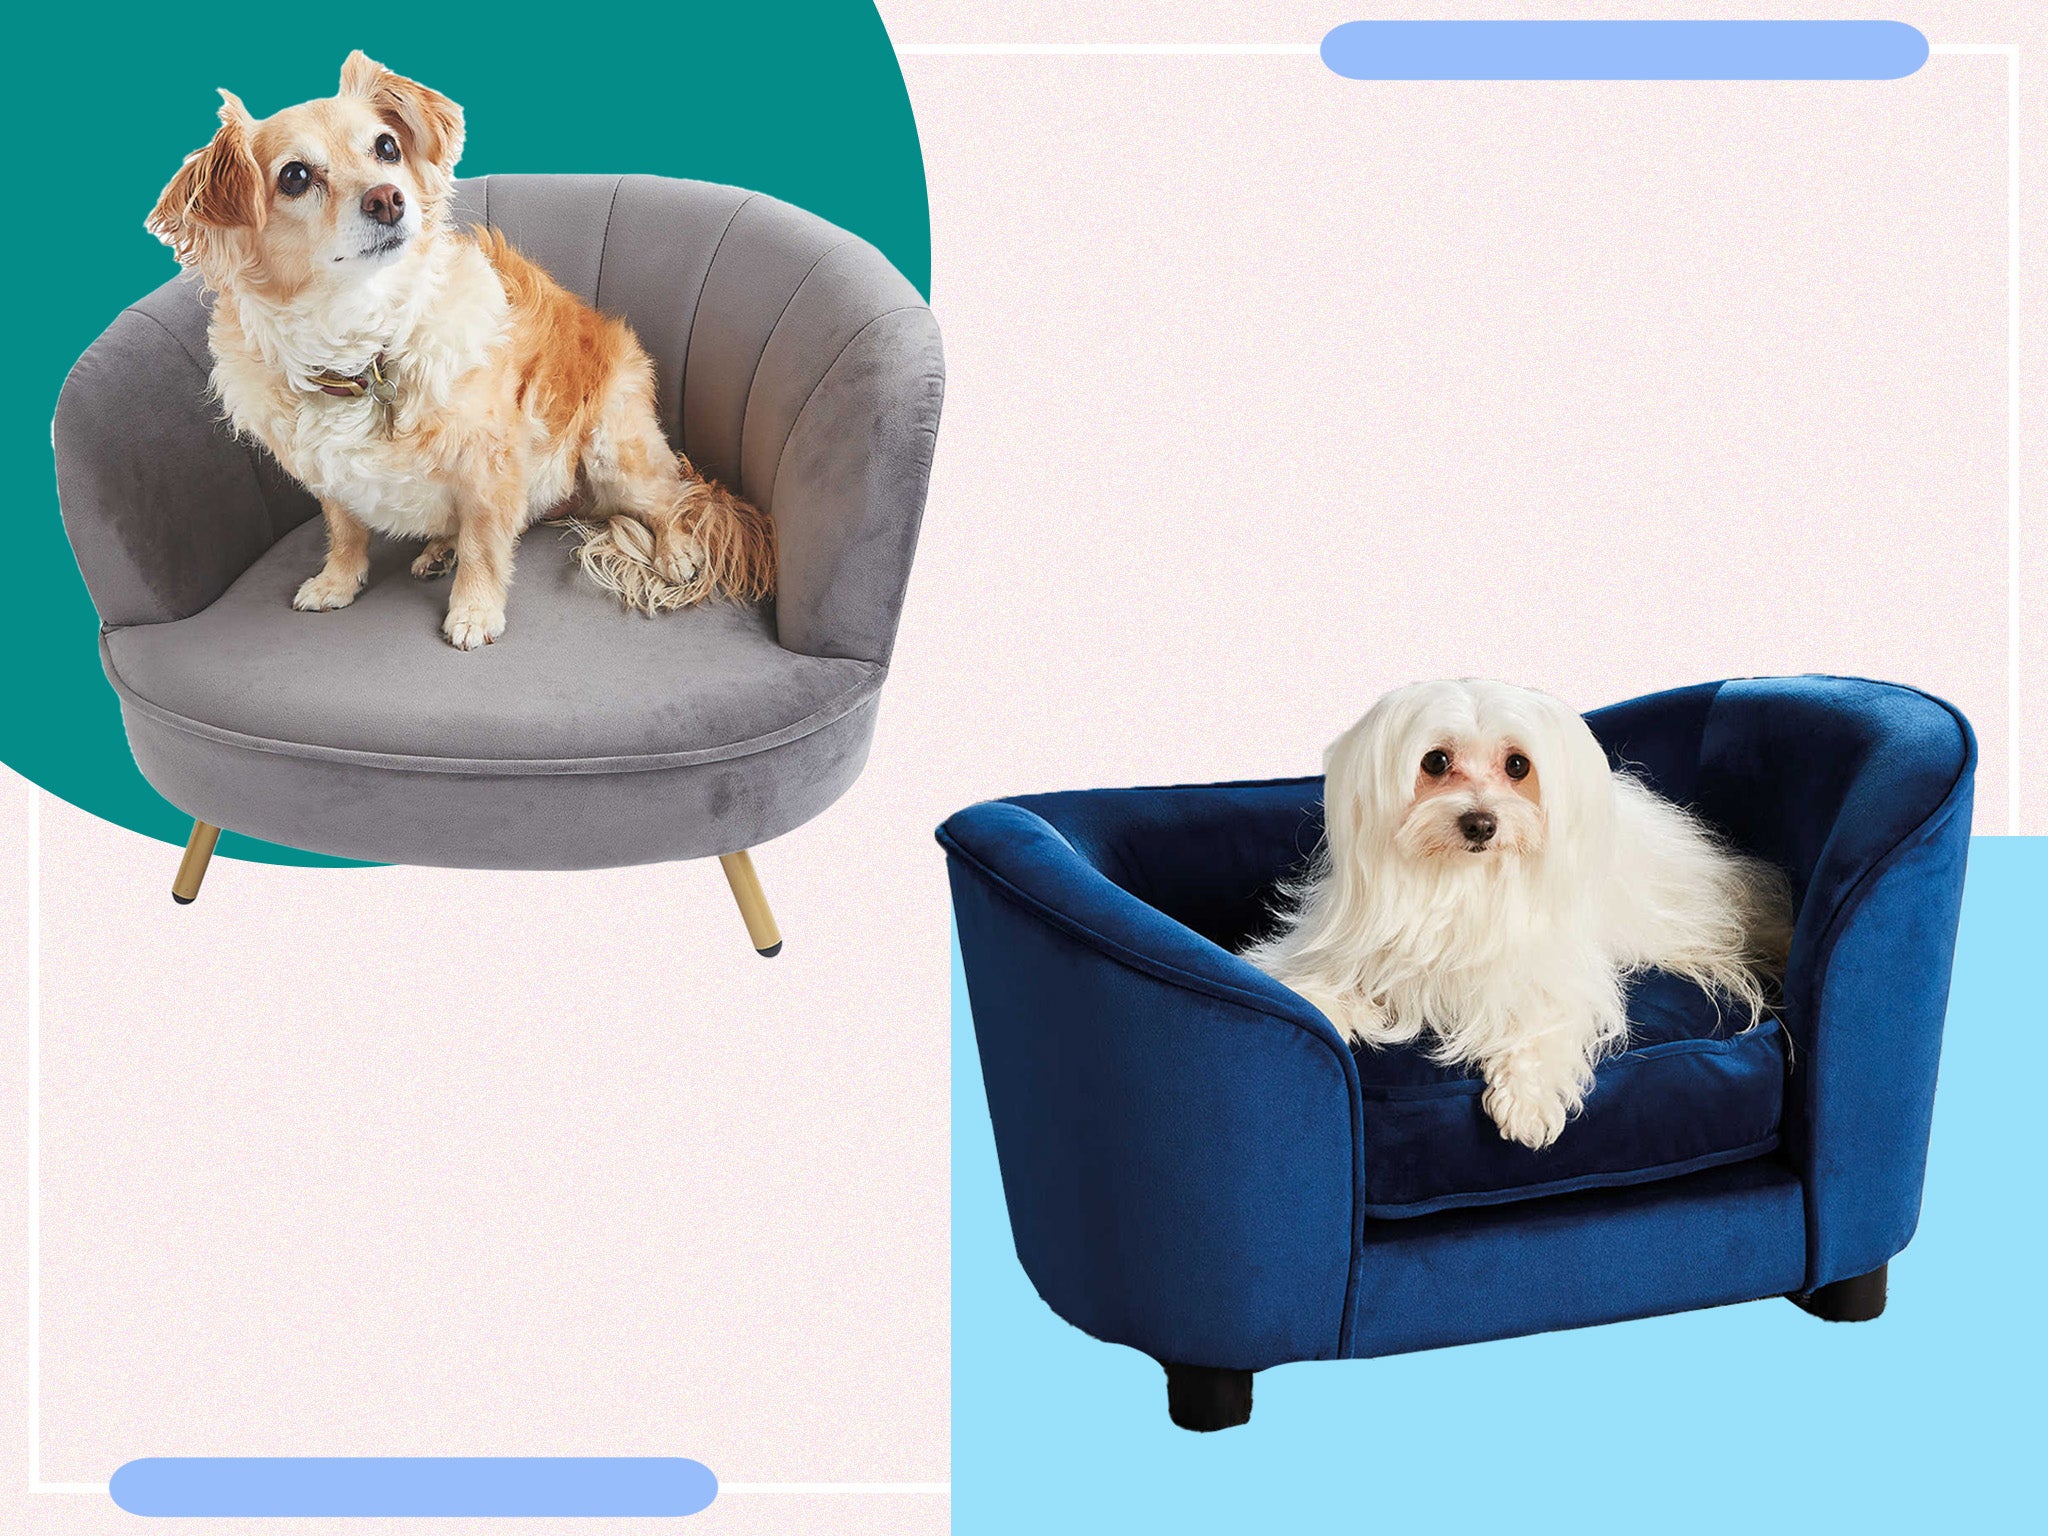 A regal design for your pooch is exactly what you need